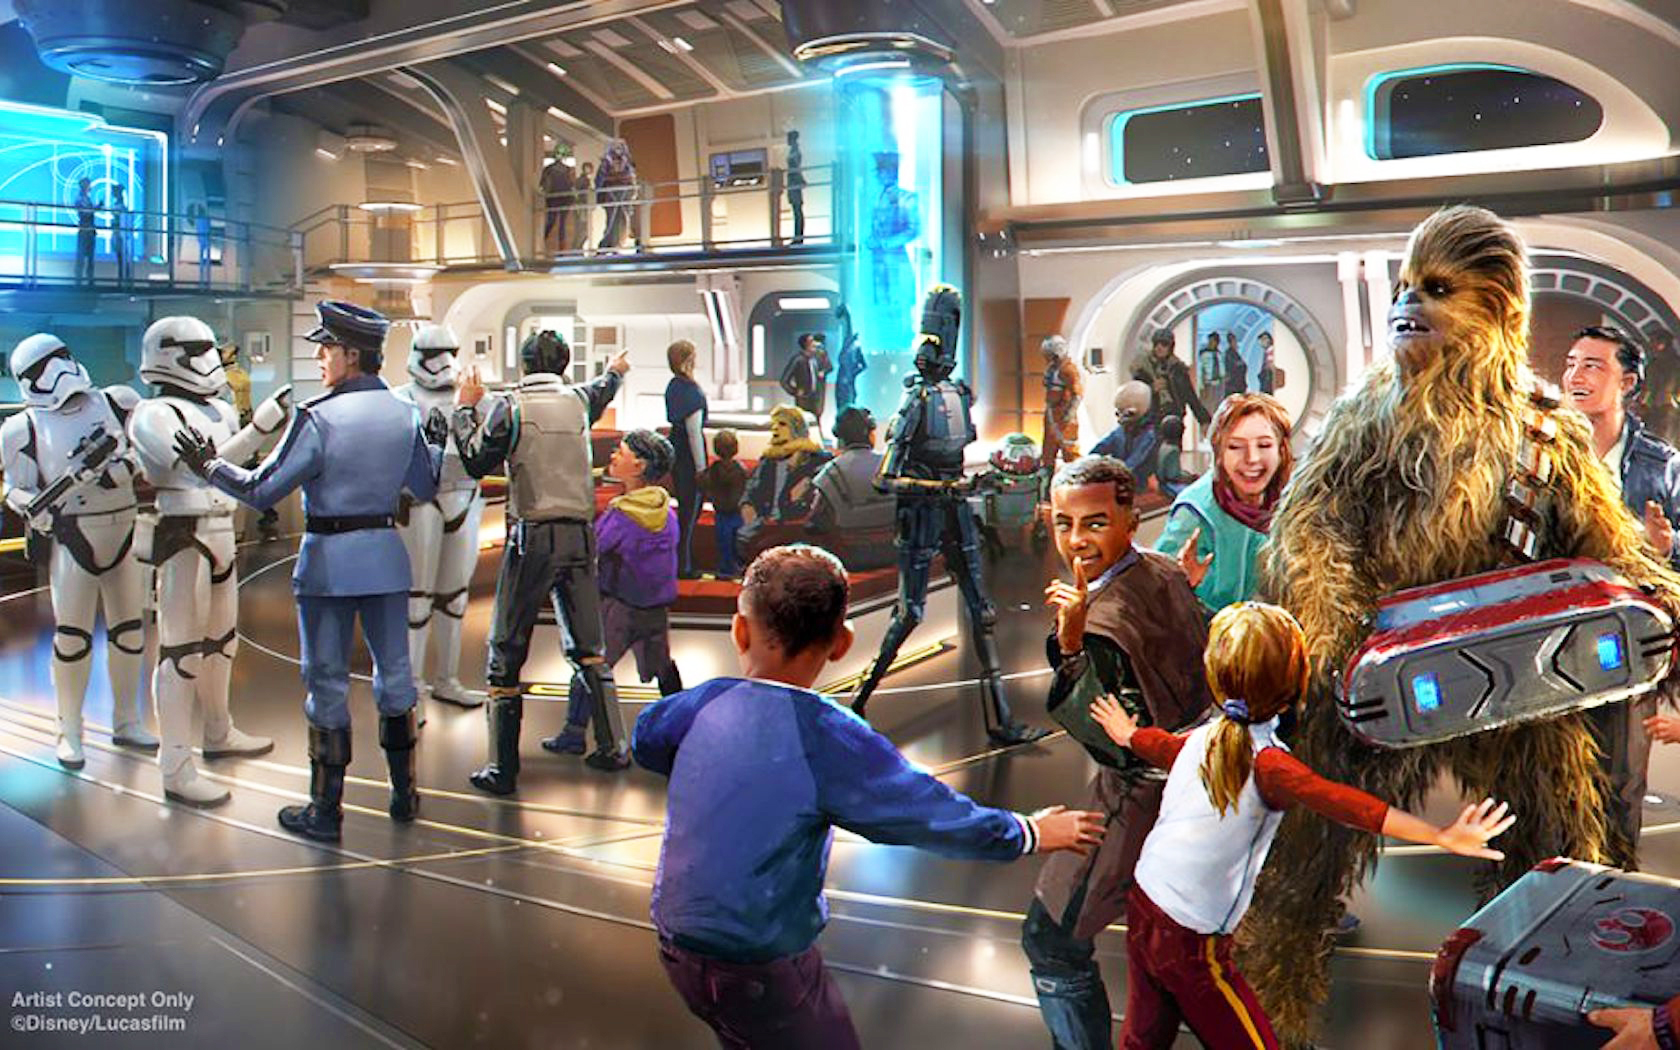 We Finally Have More Details About Disney's Star Wars Hotel